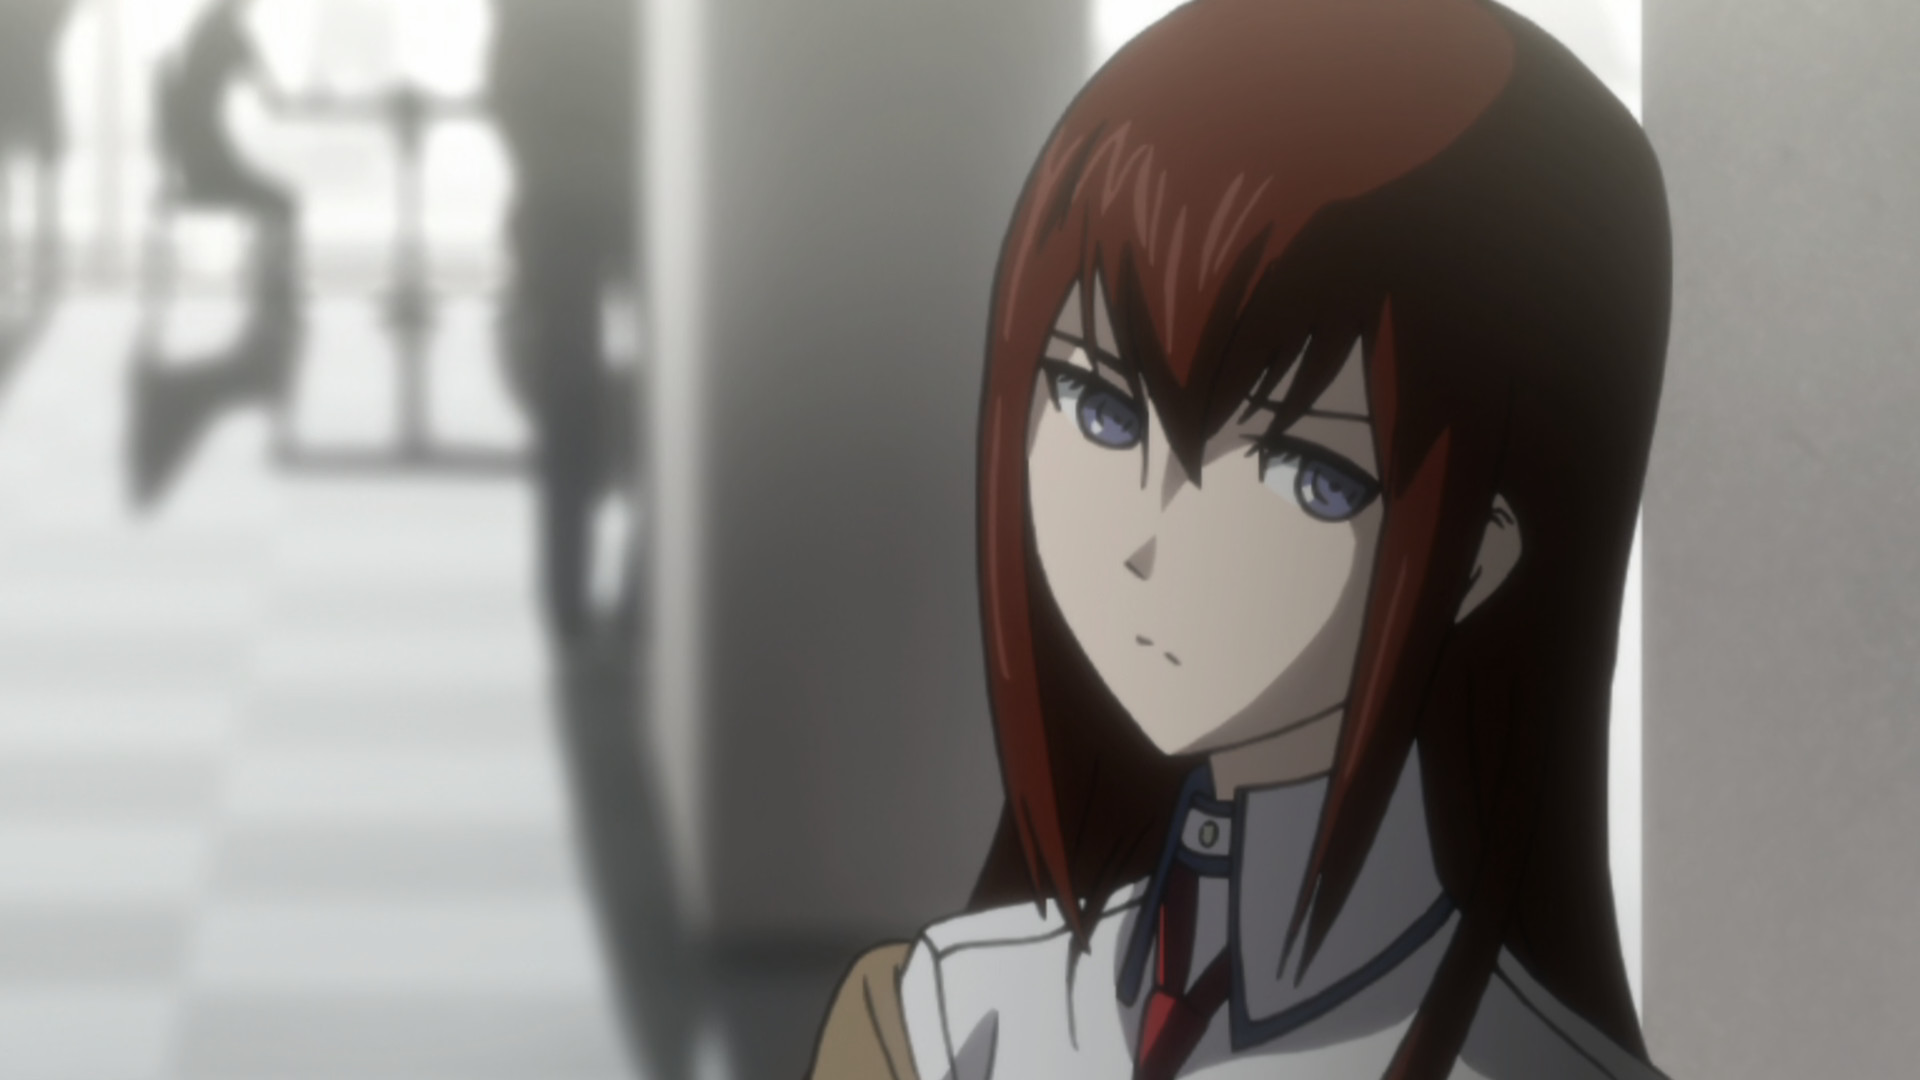 Making Up For Lost Time  SteinsGate 0 Episode 21 Review  Anime QandA